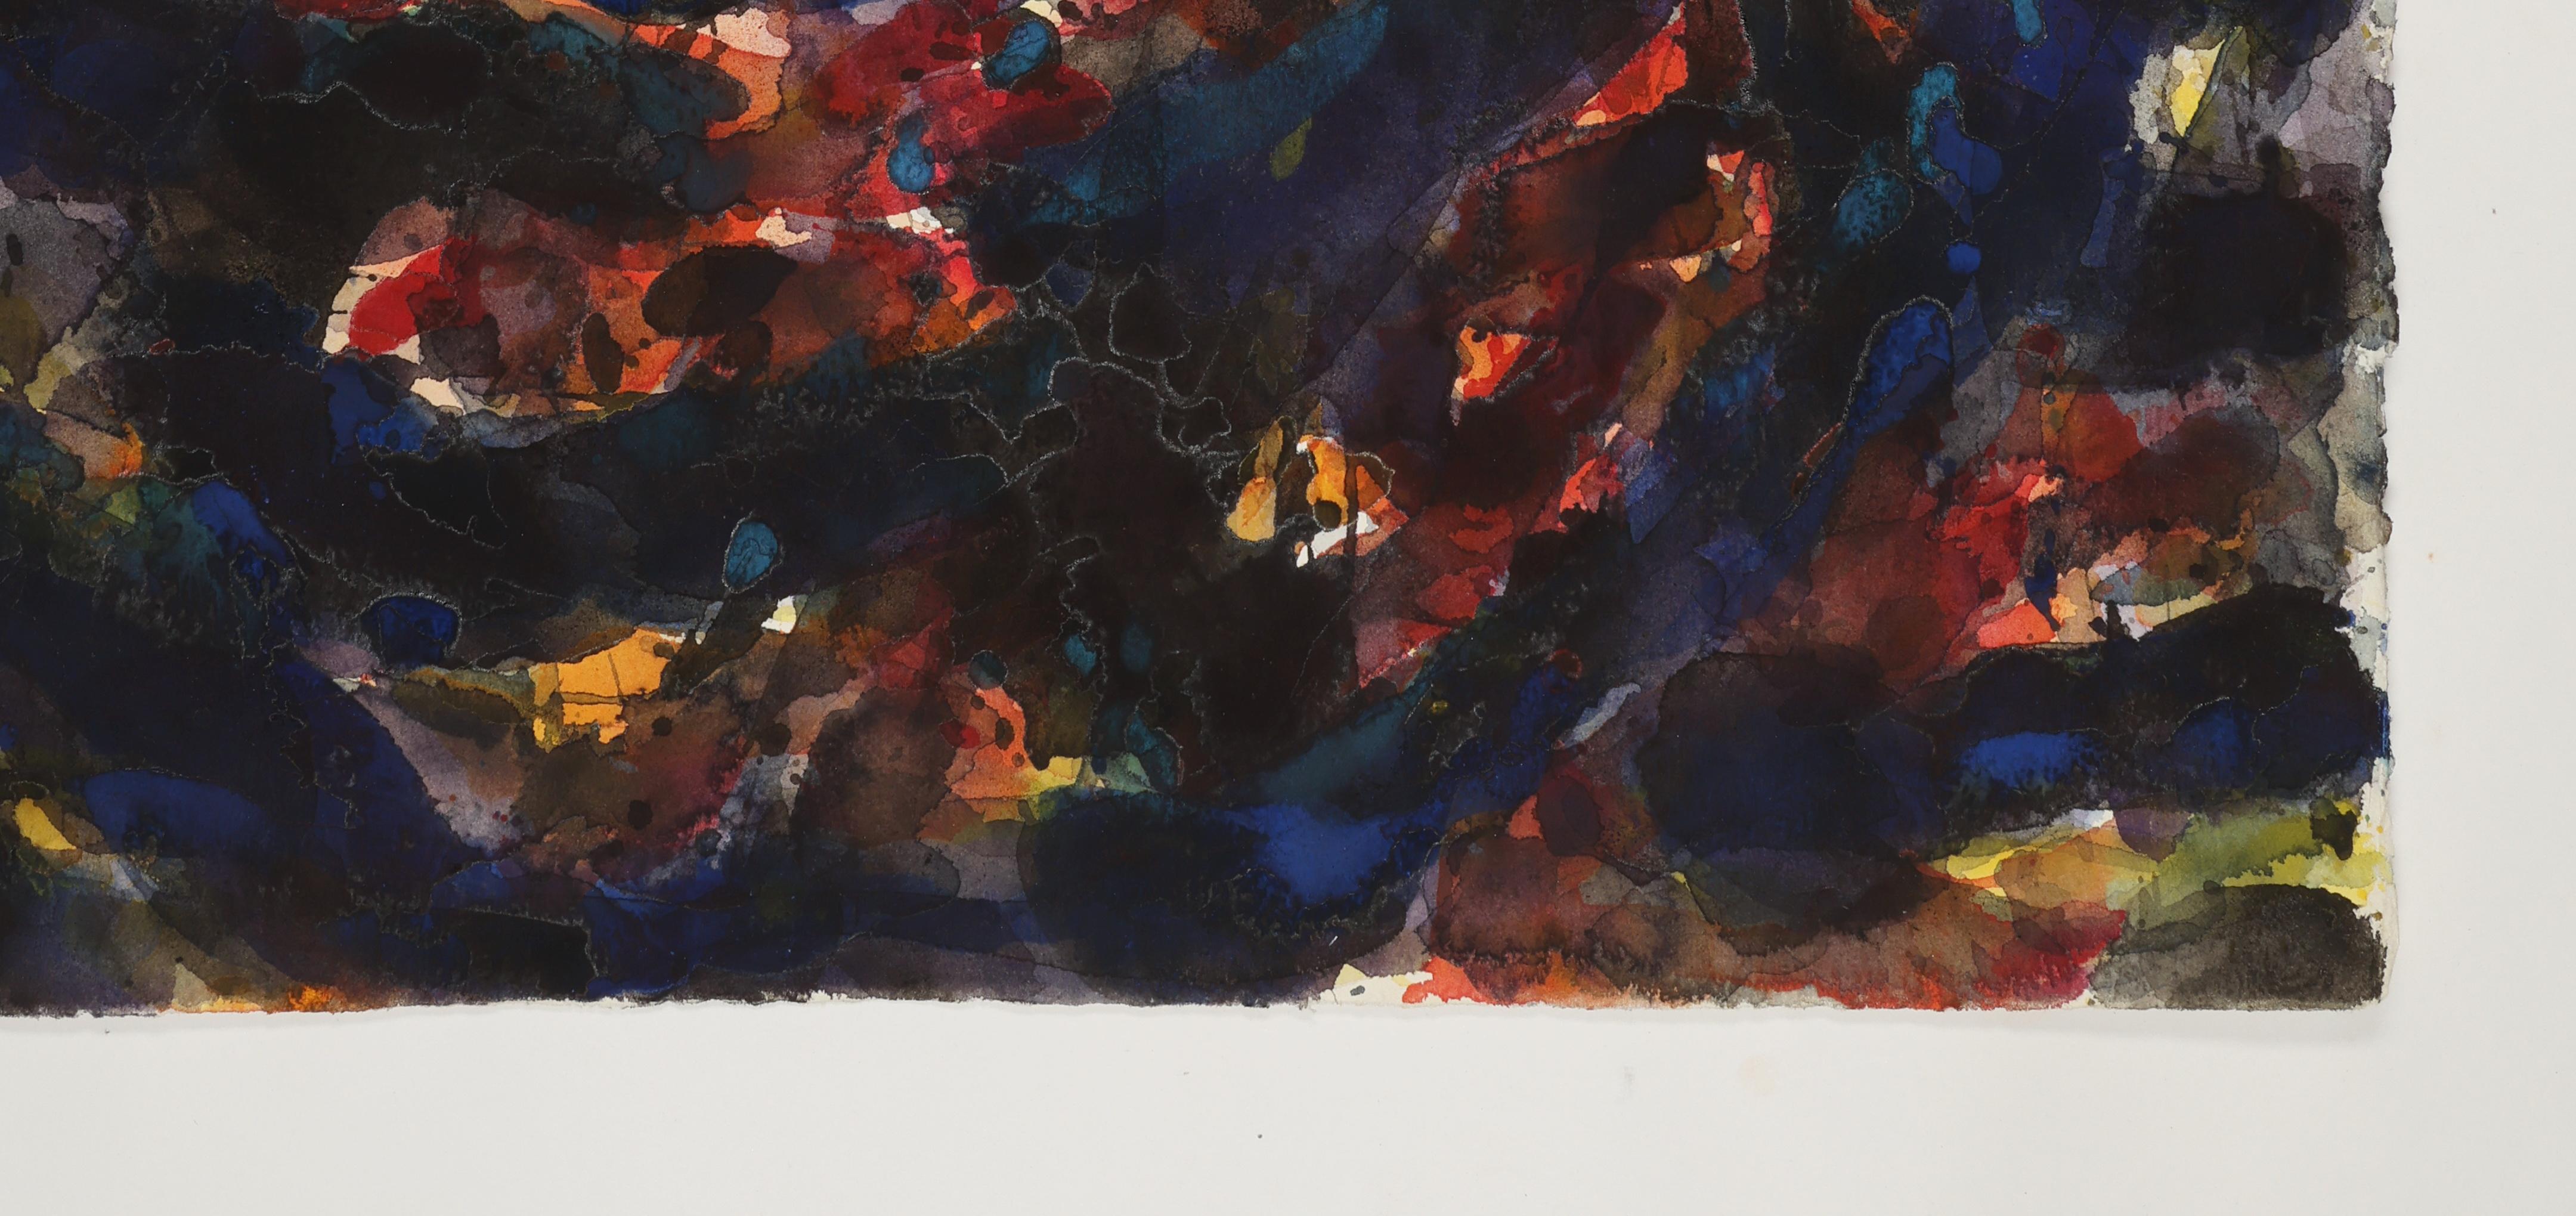 Abstract Watercolor Painting, 'Fire Series', C. 1996 by David Ruth For Sale 3